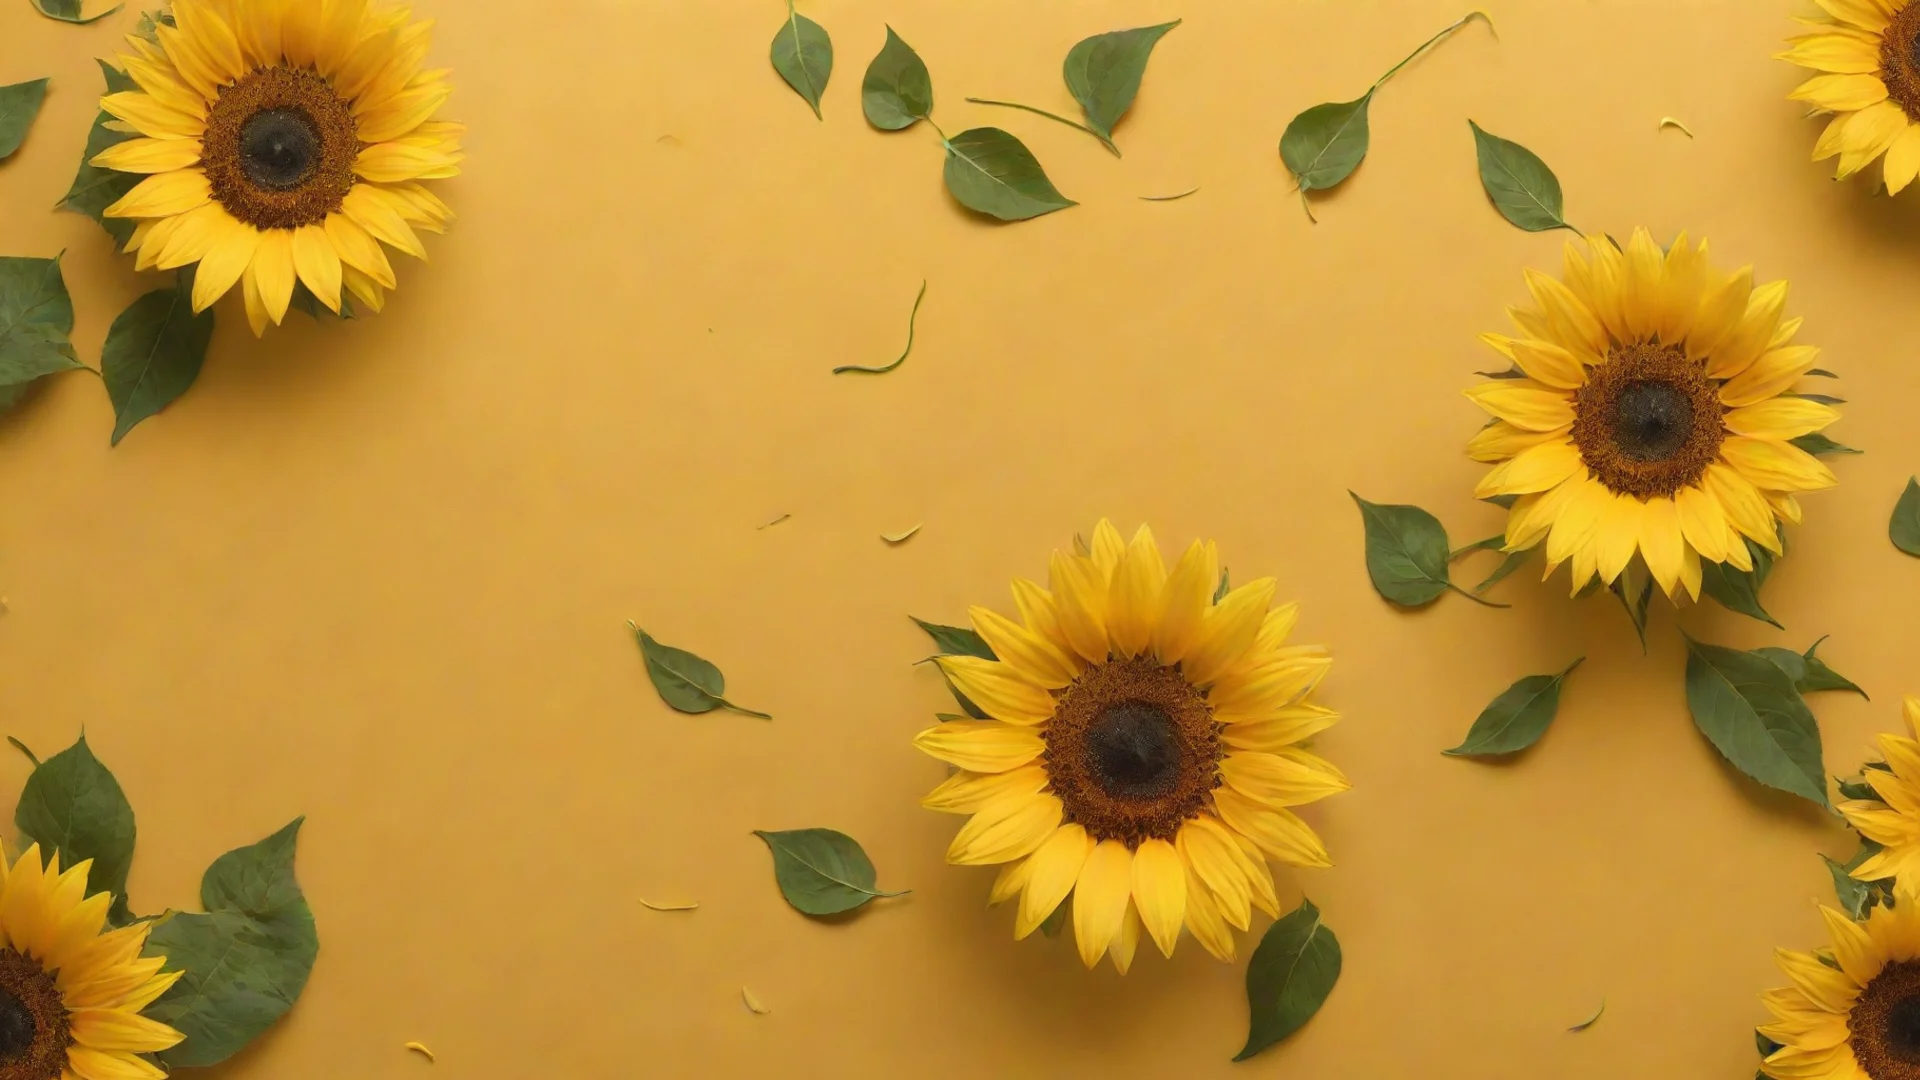 aiamazing swirling yellow background with sunflowers strewn about awesome portrait 2 wide